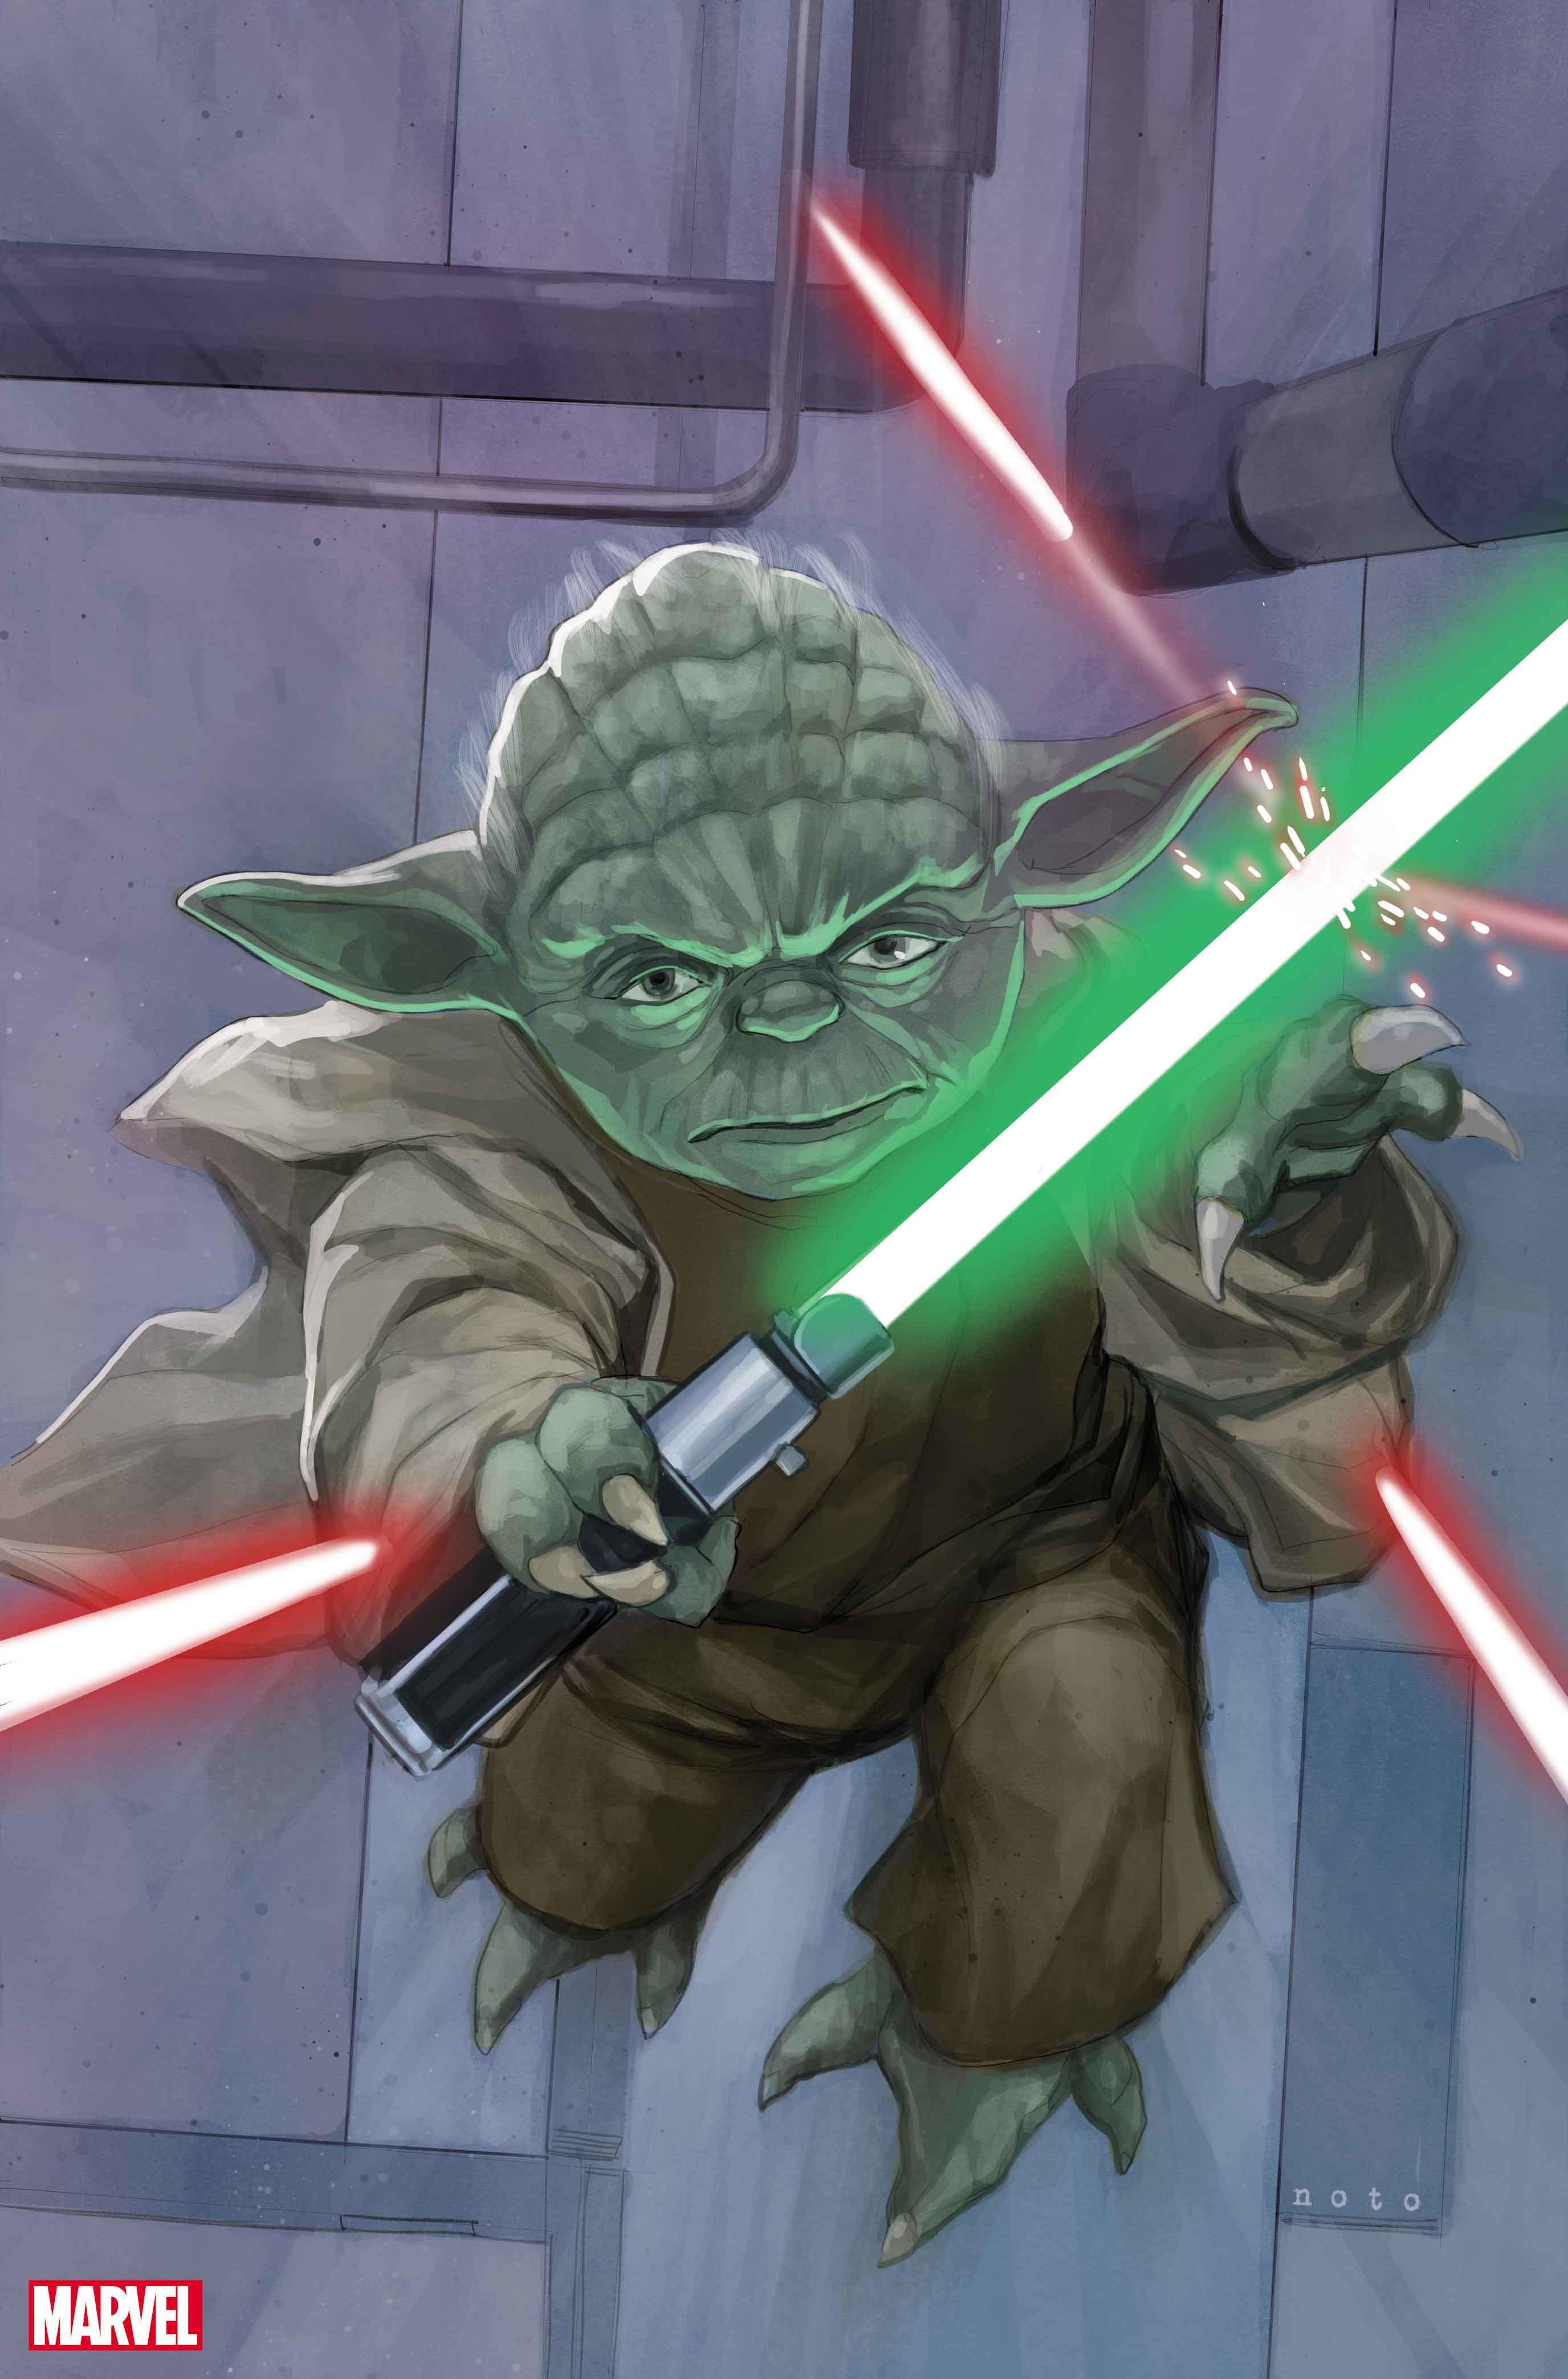 Yoda Series Announced By Marvel